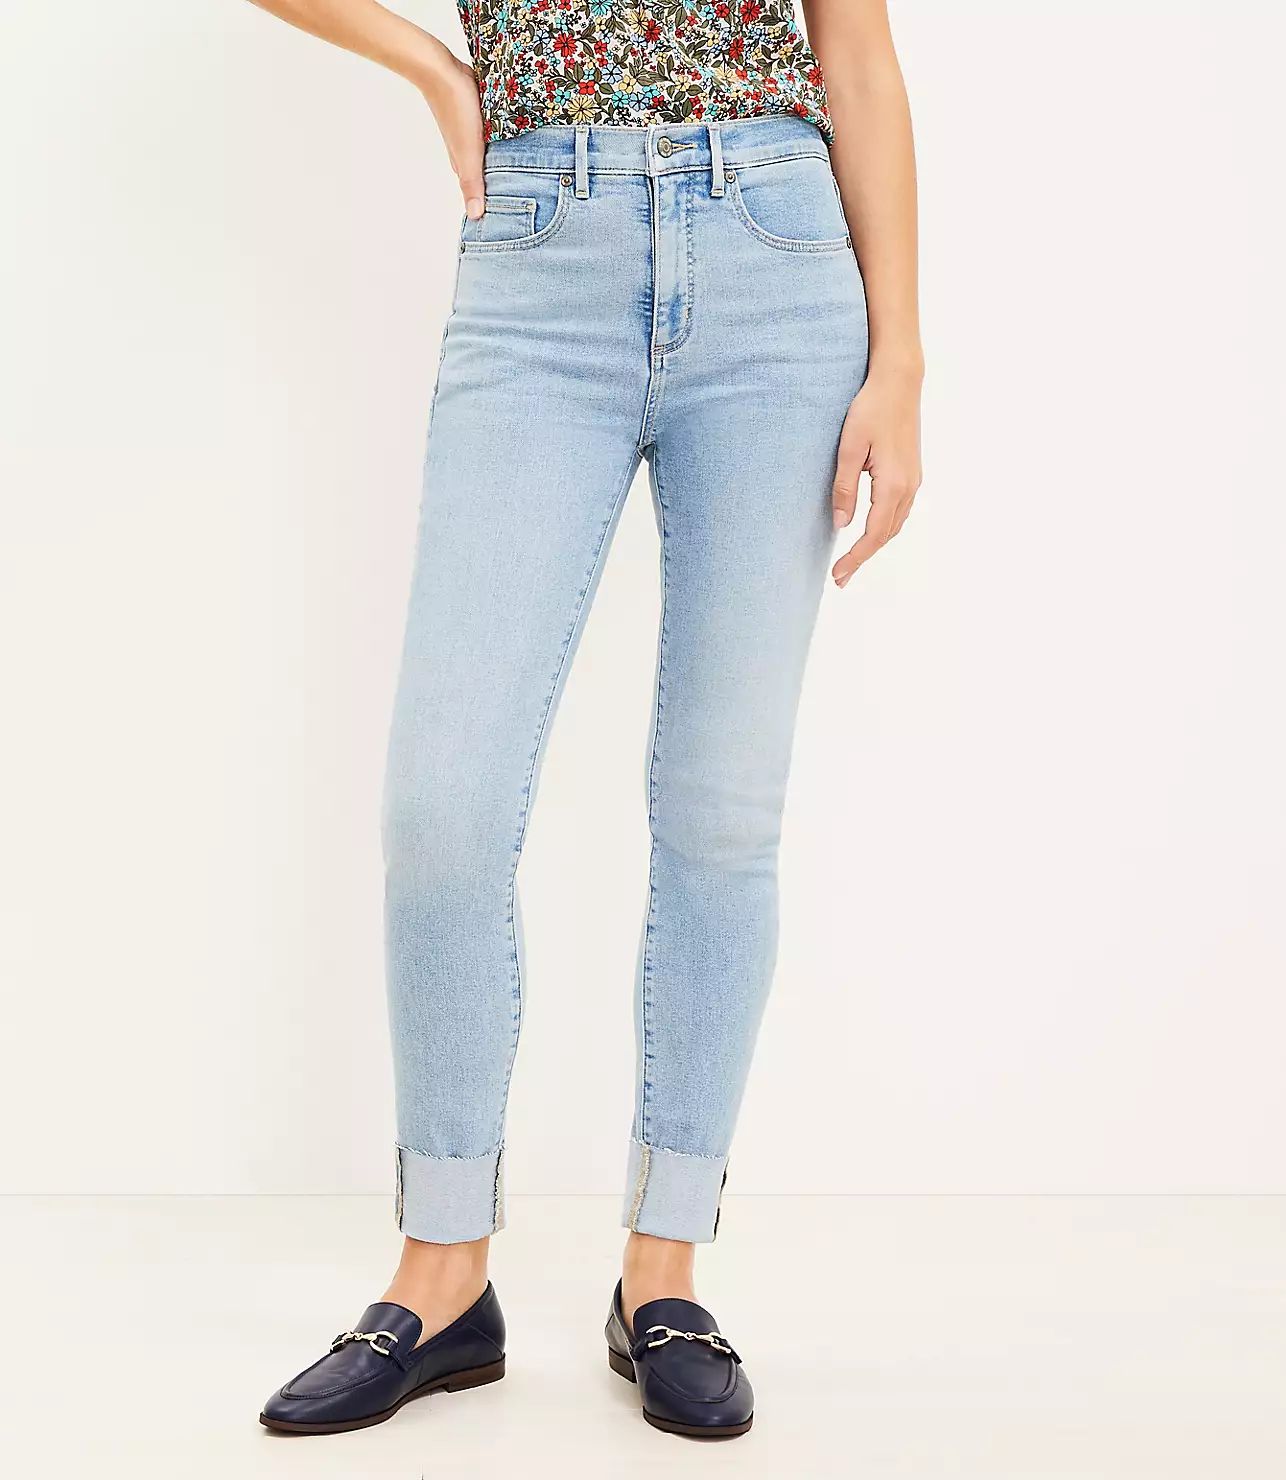 Frayed Cuff Button Front High Rise Skinny Jeans in Light Wash Indigo | LOFT